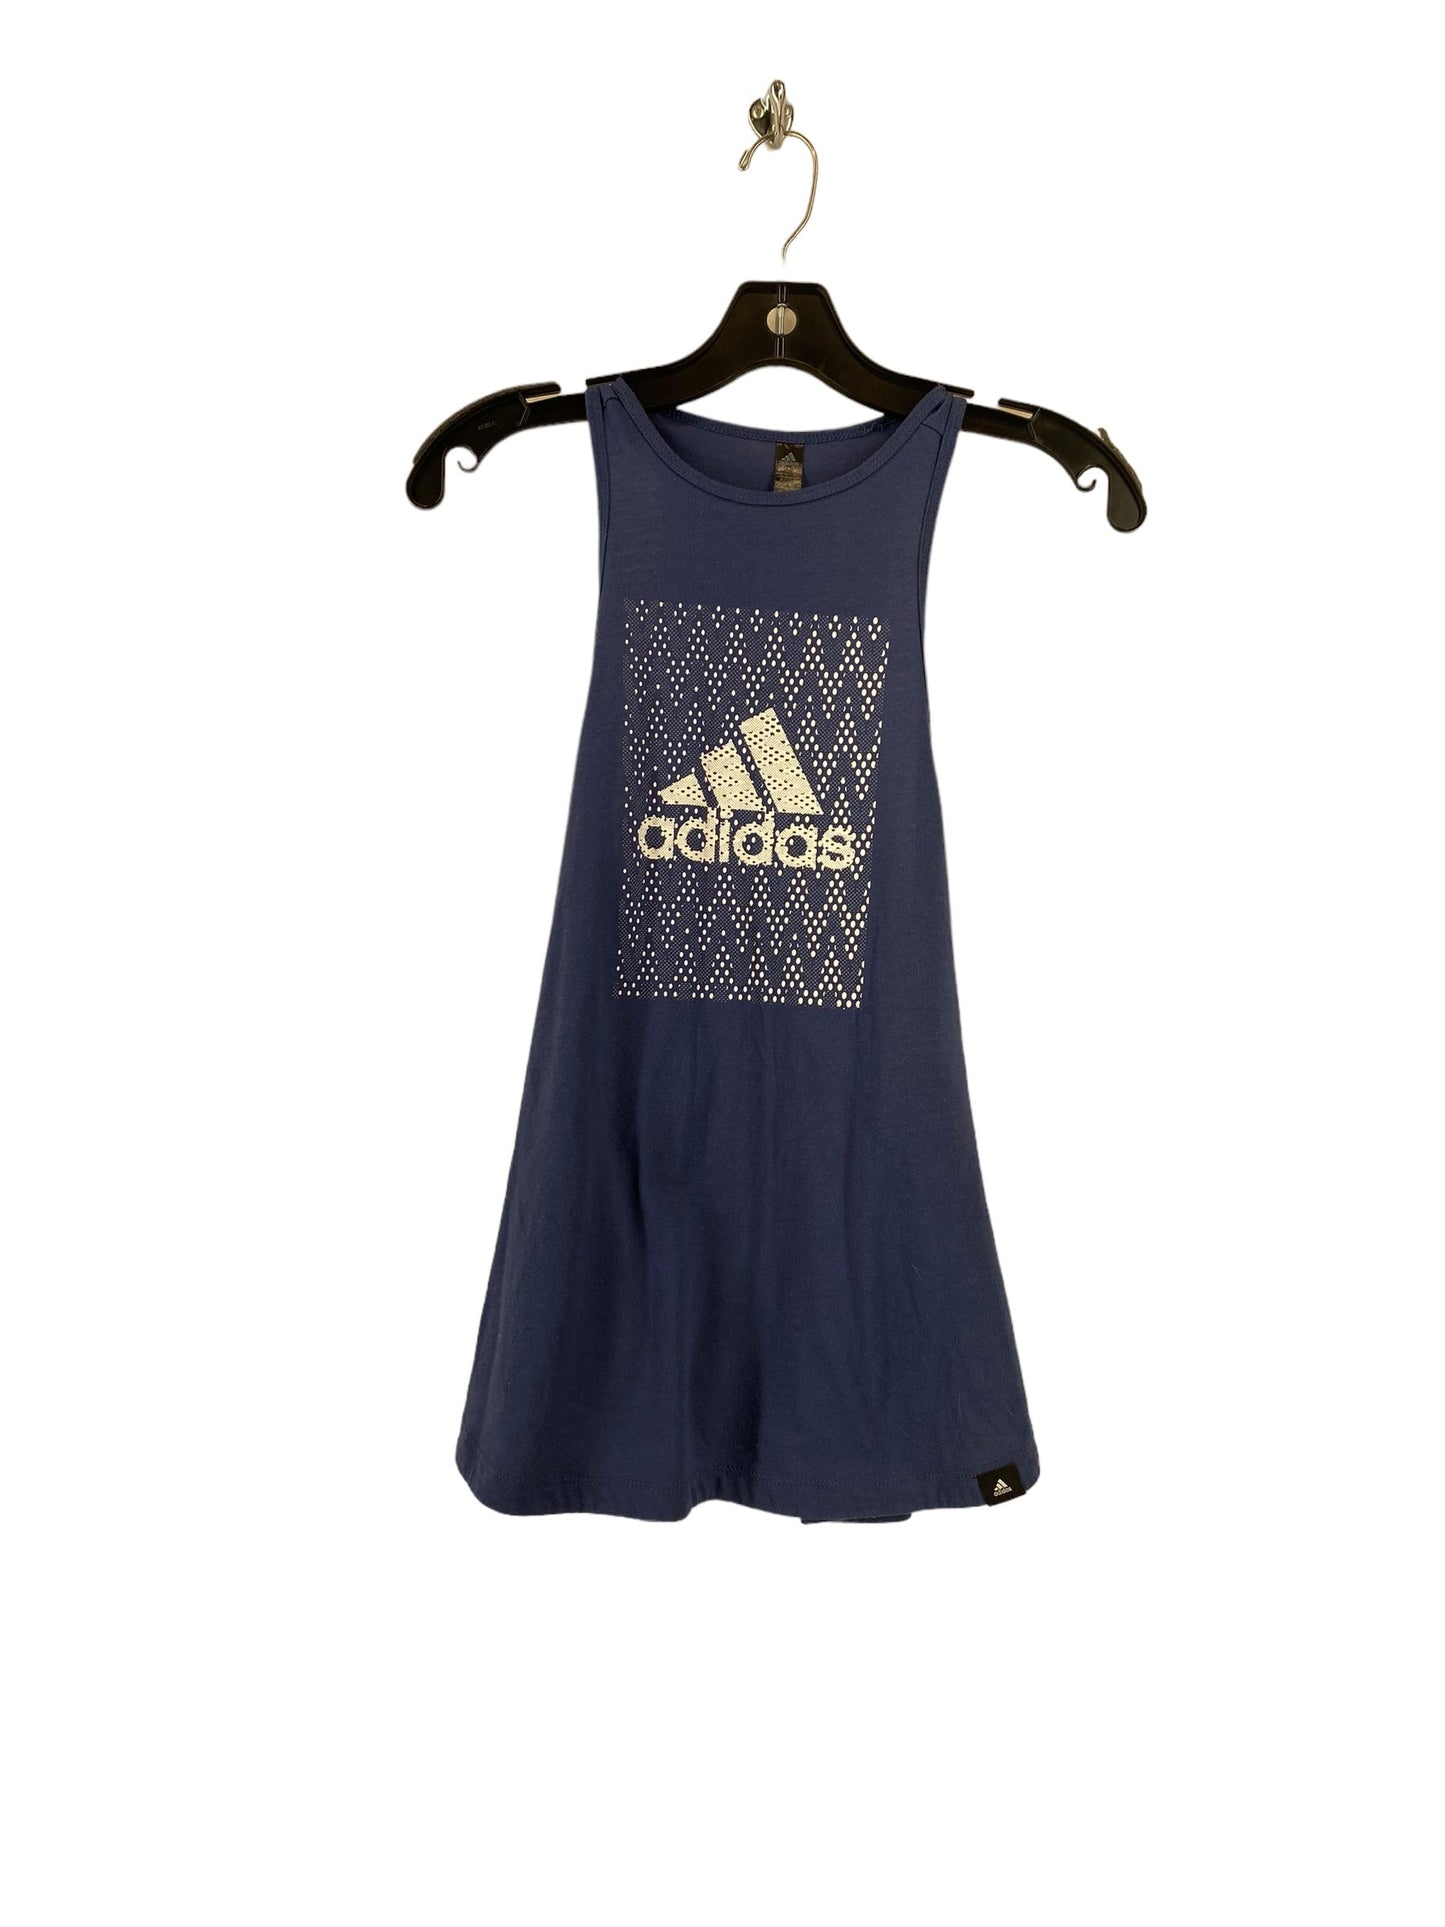 Navy Athletic Tank Top Adidas, Size M